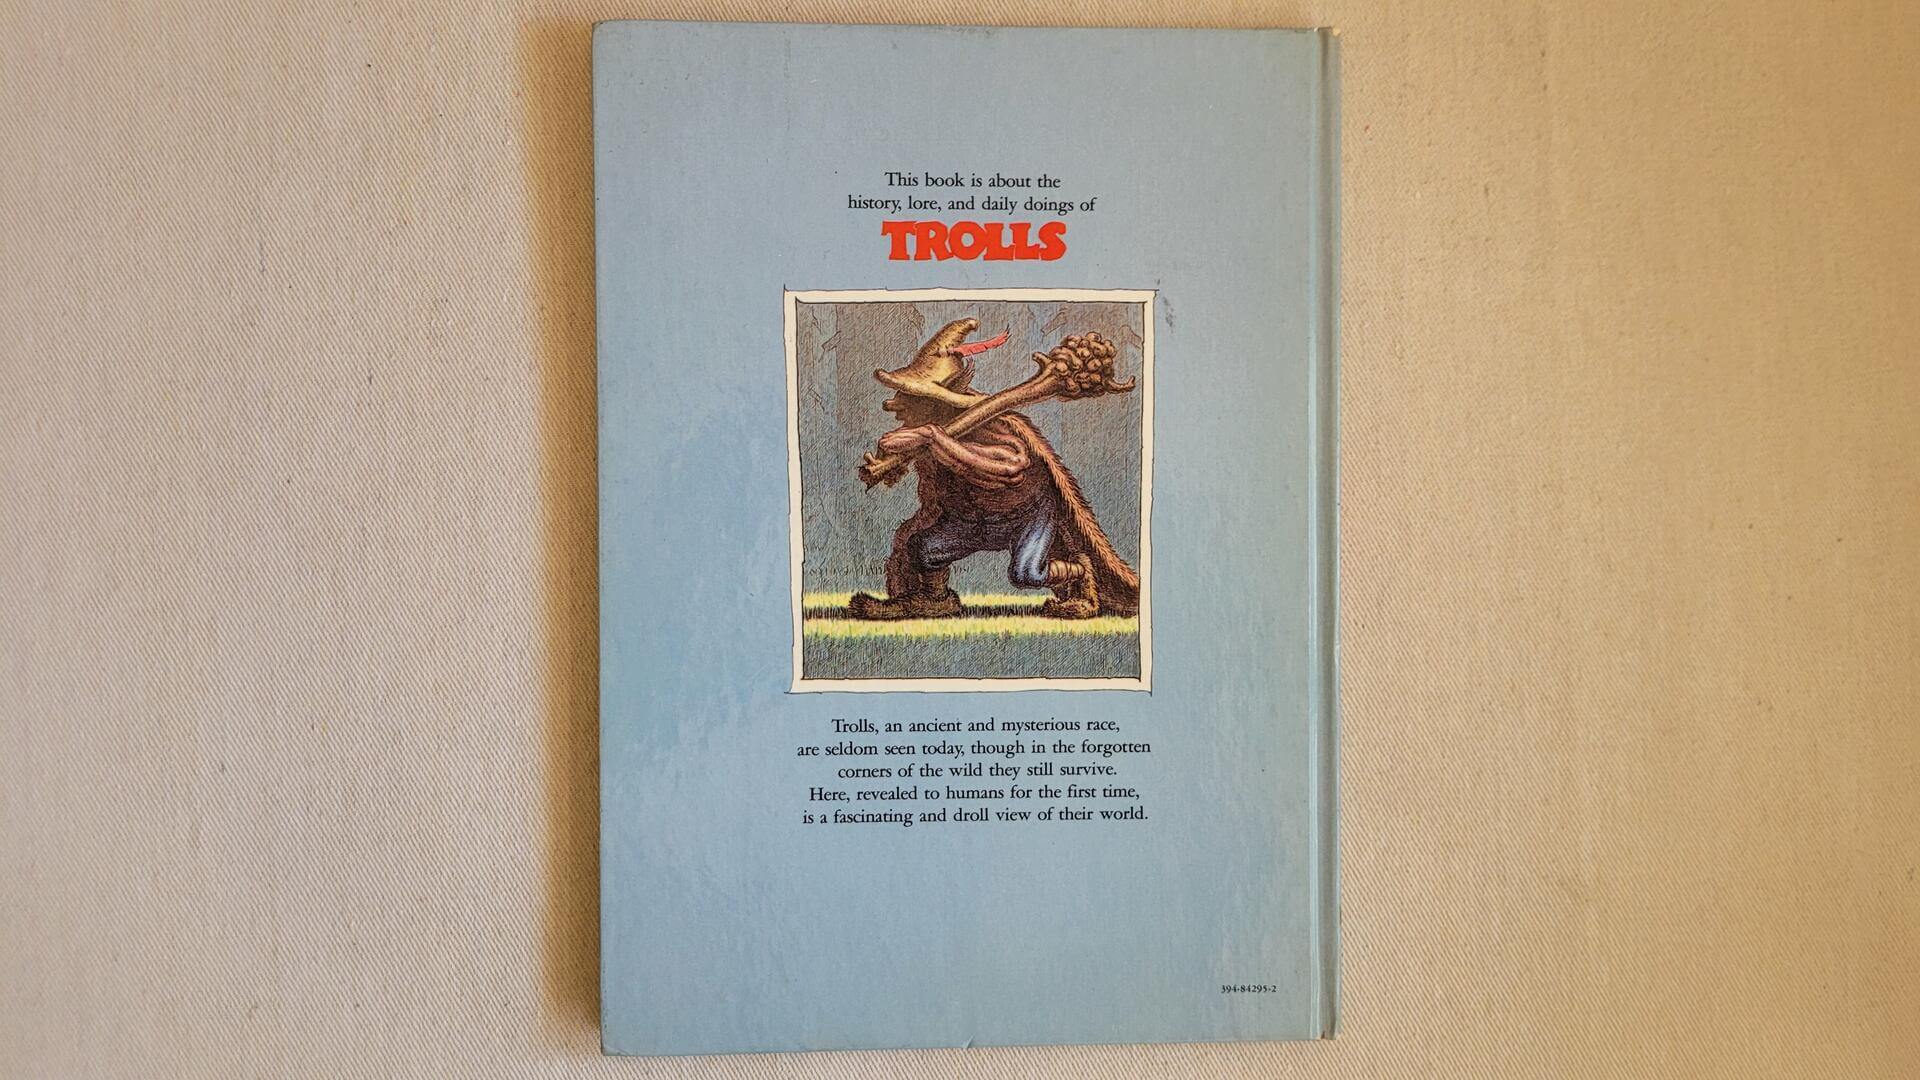 The Troll Book By Michael Berenstain published in 1980 by Random House Childrens Books. An illustrated history of trolls and their daily routines, homes, family life, myths, entertainments and some of their neighbors, the dwarfs and elves. Rare vintage collectible children books ISBN-10: ‎0394842952 and ISBN-13: 978-0394842950